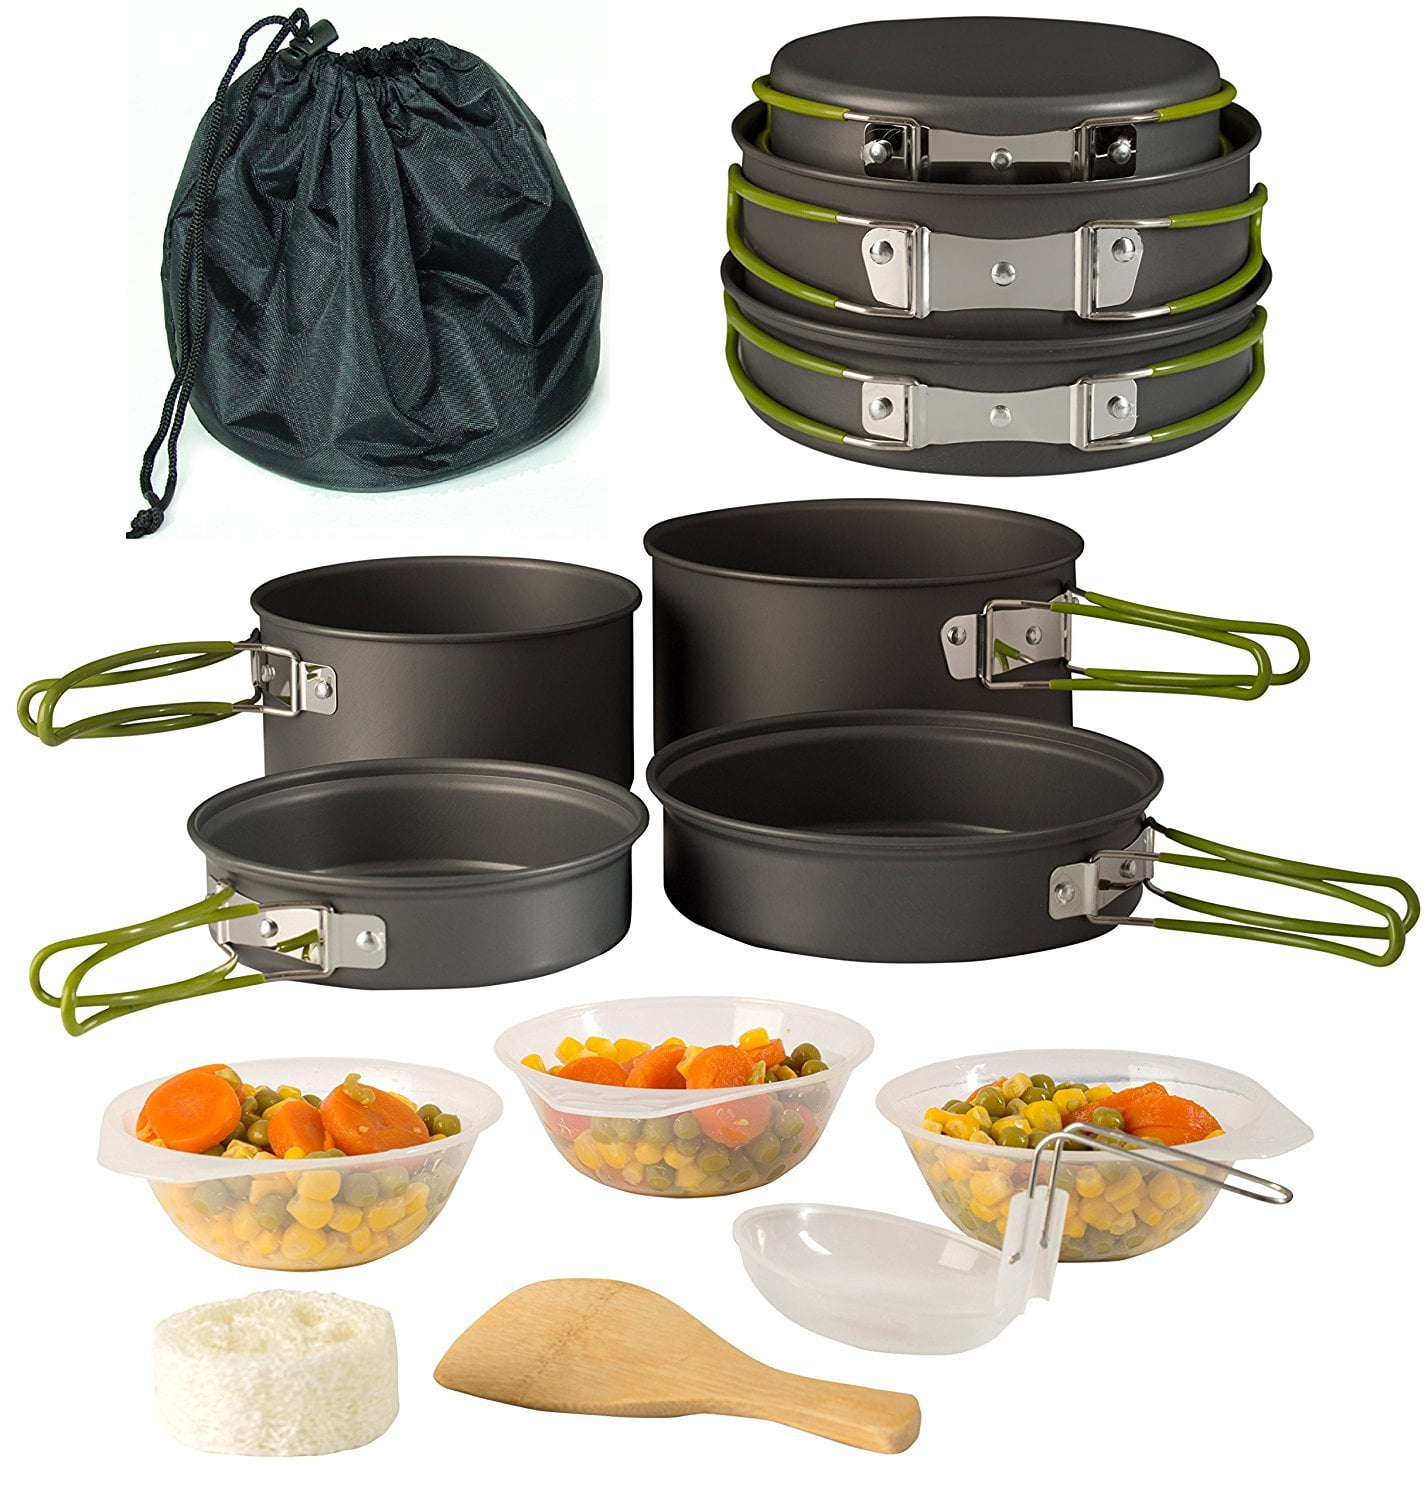 Comes with Nylon Storage Bag Lightweight Durable and Compact for Outdoor Cooking Fits easily inside Backpack Camping Cookware Mess Kit Set for Backpacking and Hiking